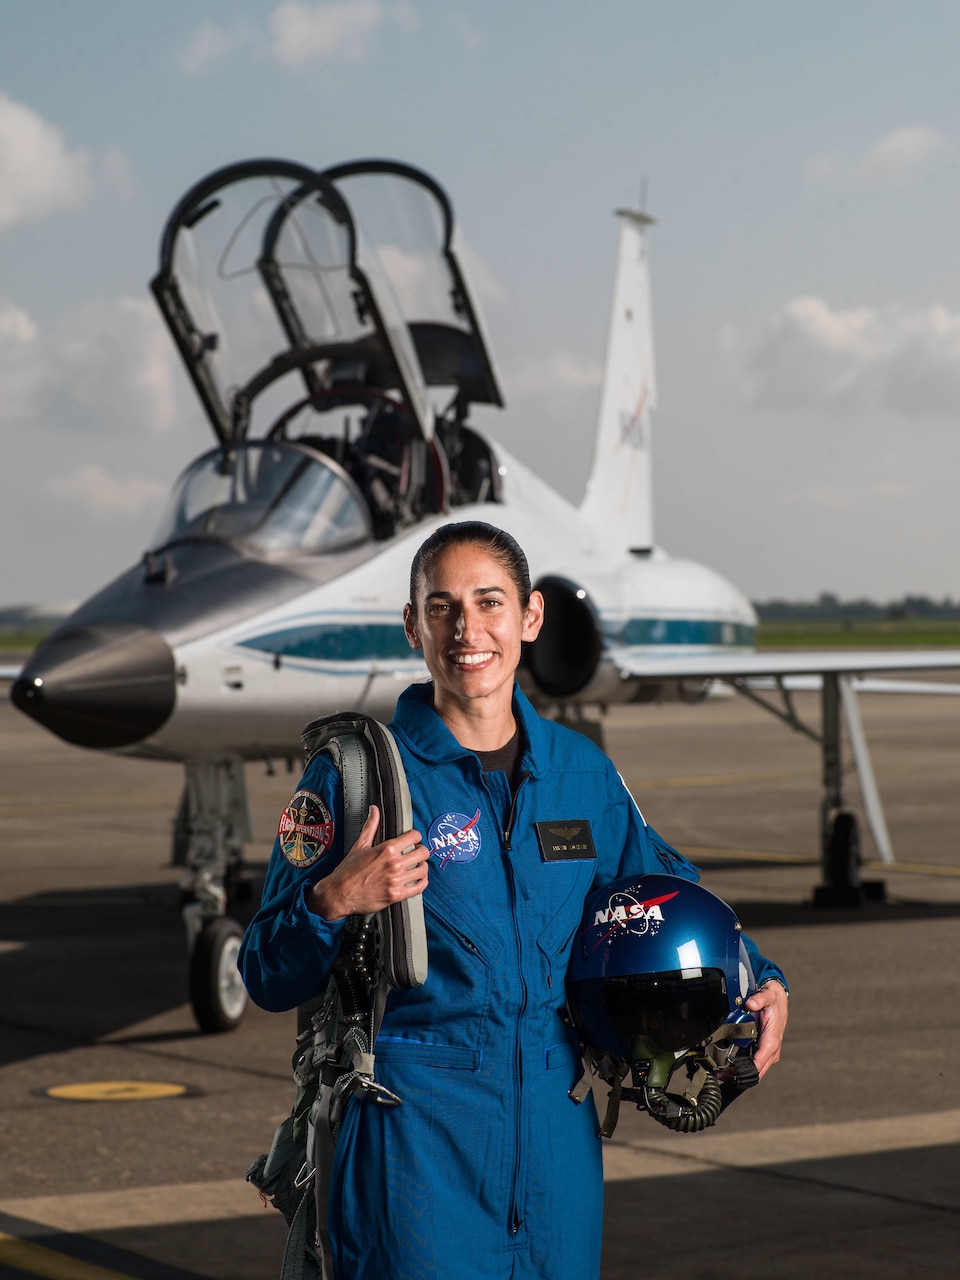 A female astronaut wearing a blue flight suit and NASA-logoed helmet poses in front of a T-38 Talon trainer airplane.